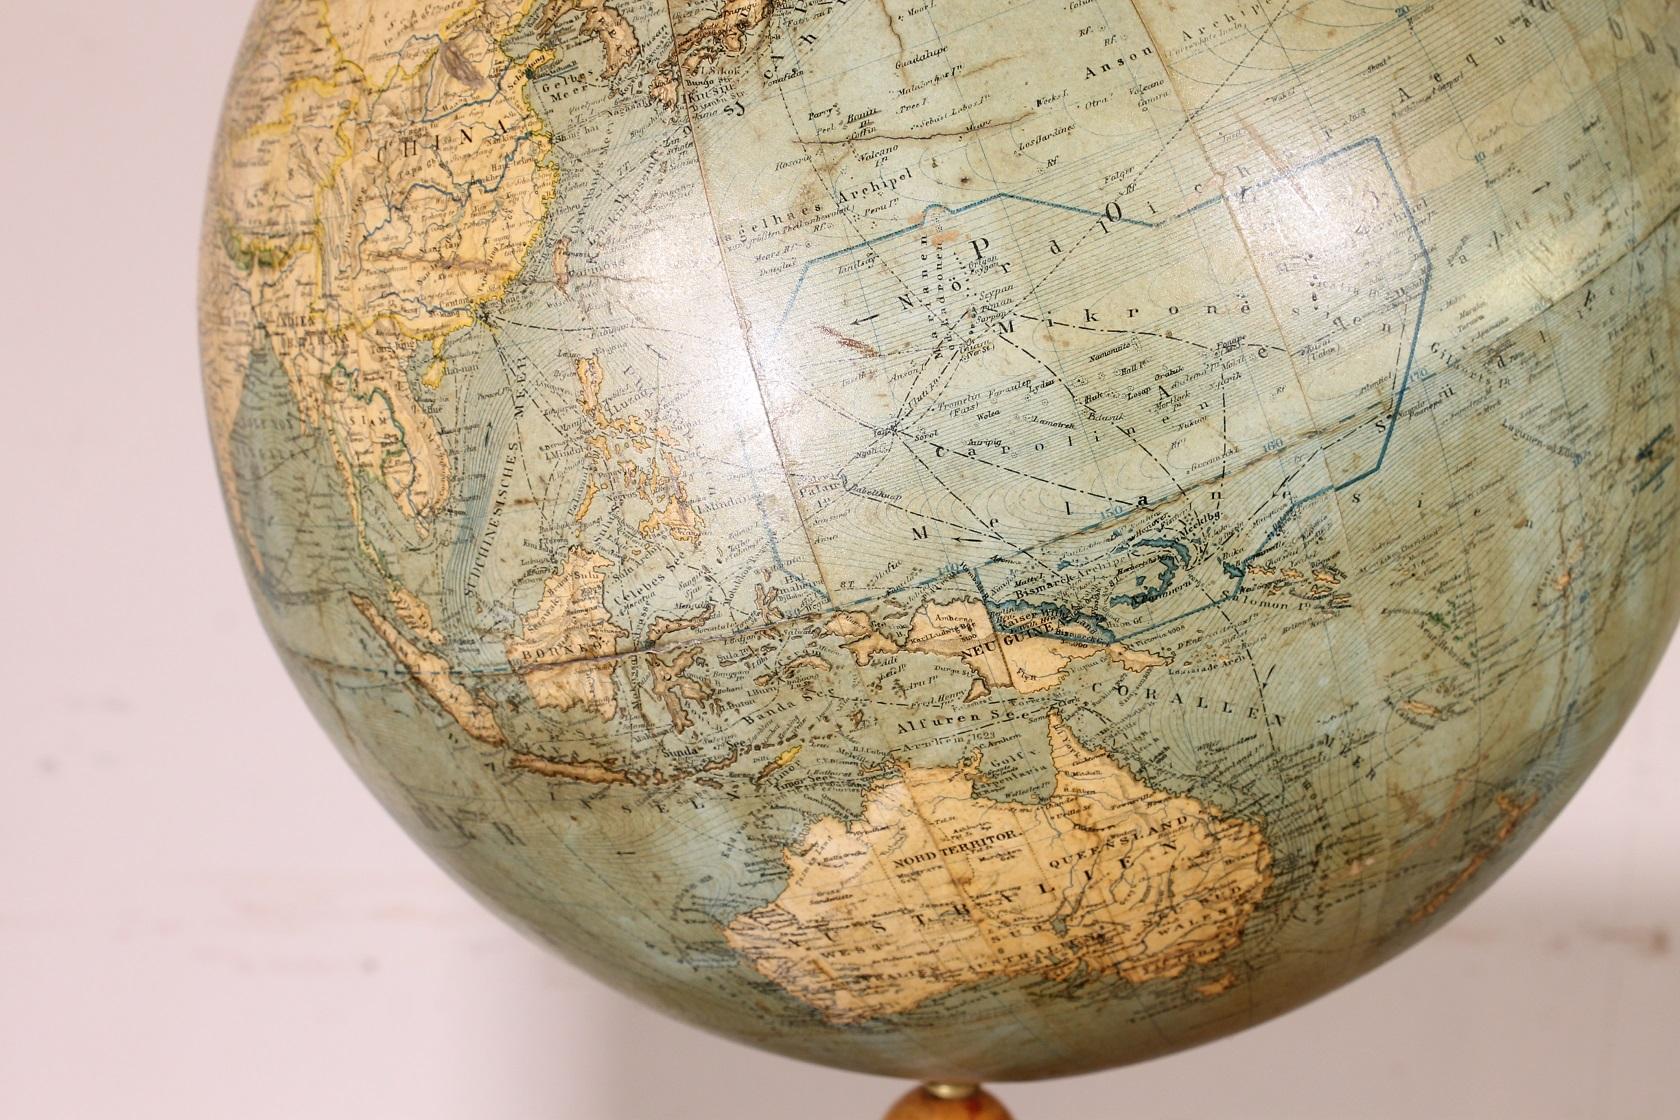 Paper Terrestrial Globe Erd Globus From The 19th Century For Sale